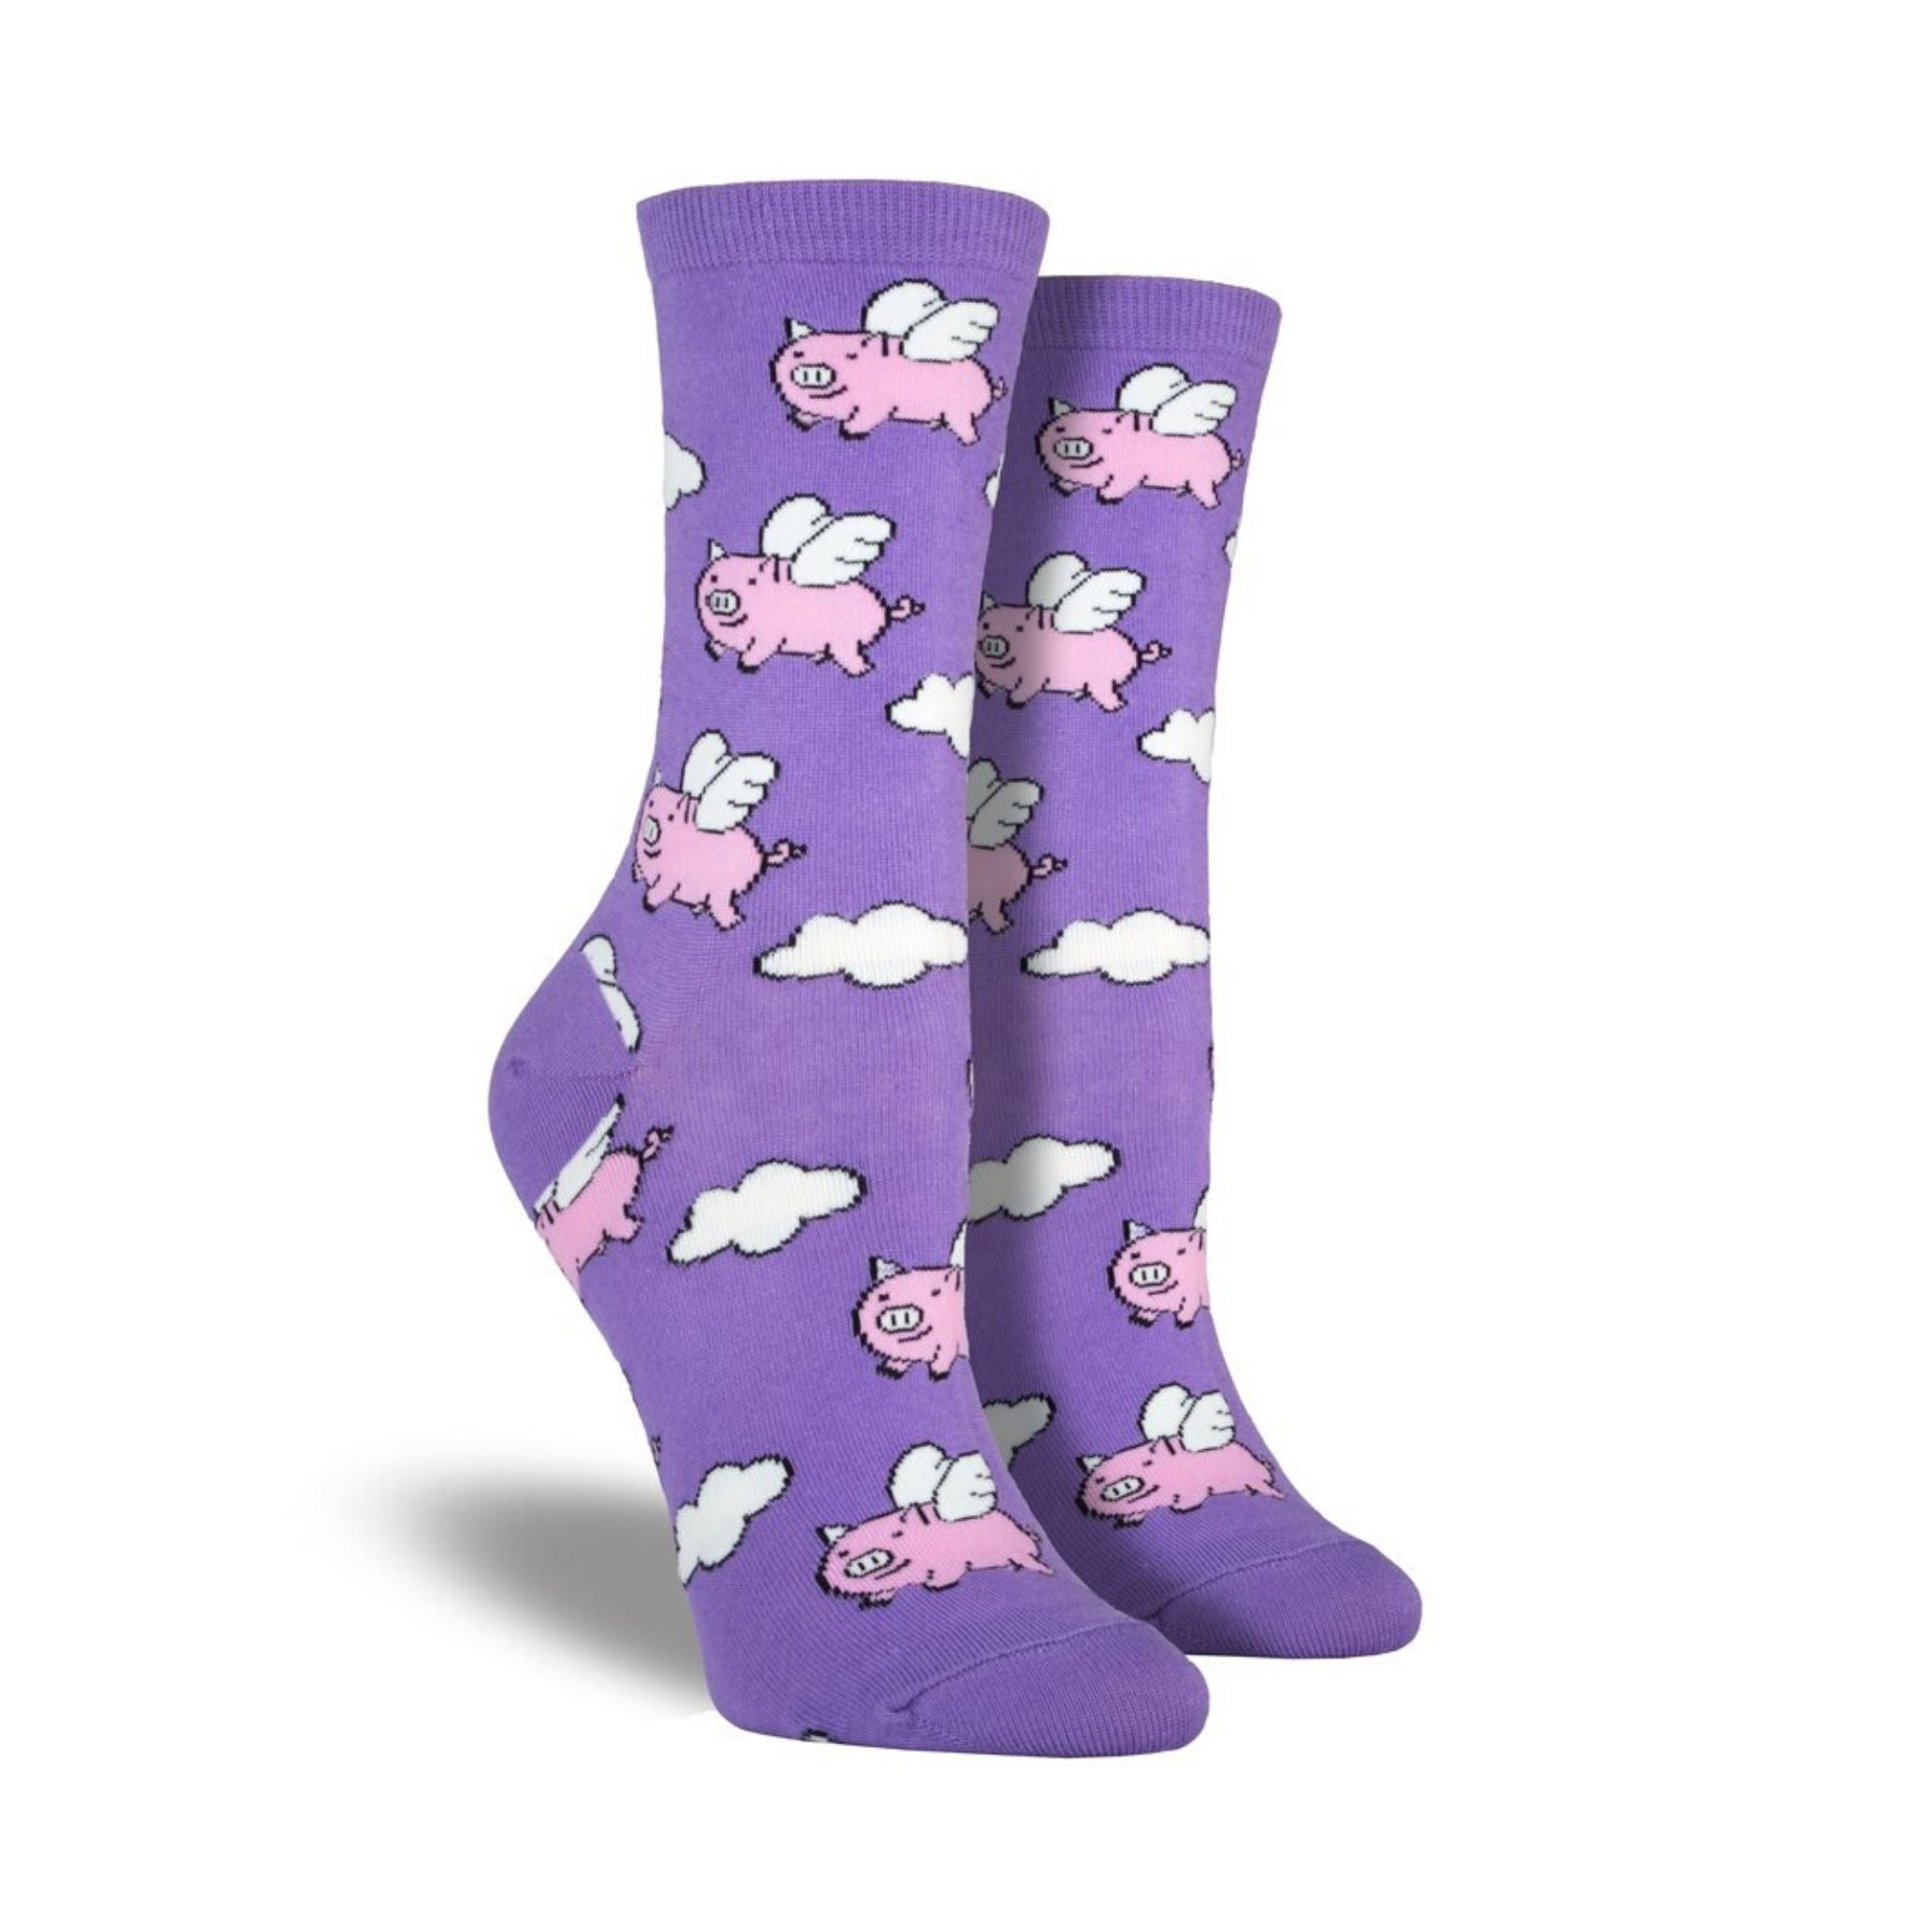 Women's purple crew socks with flying pigs on them.